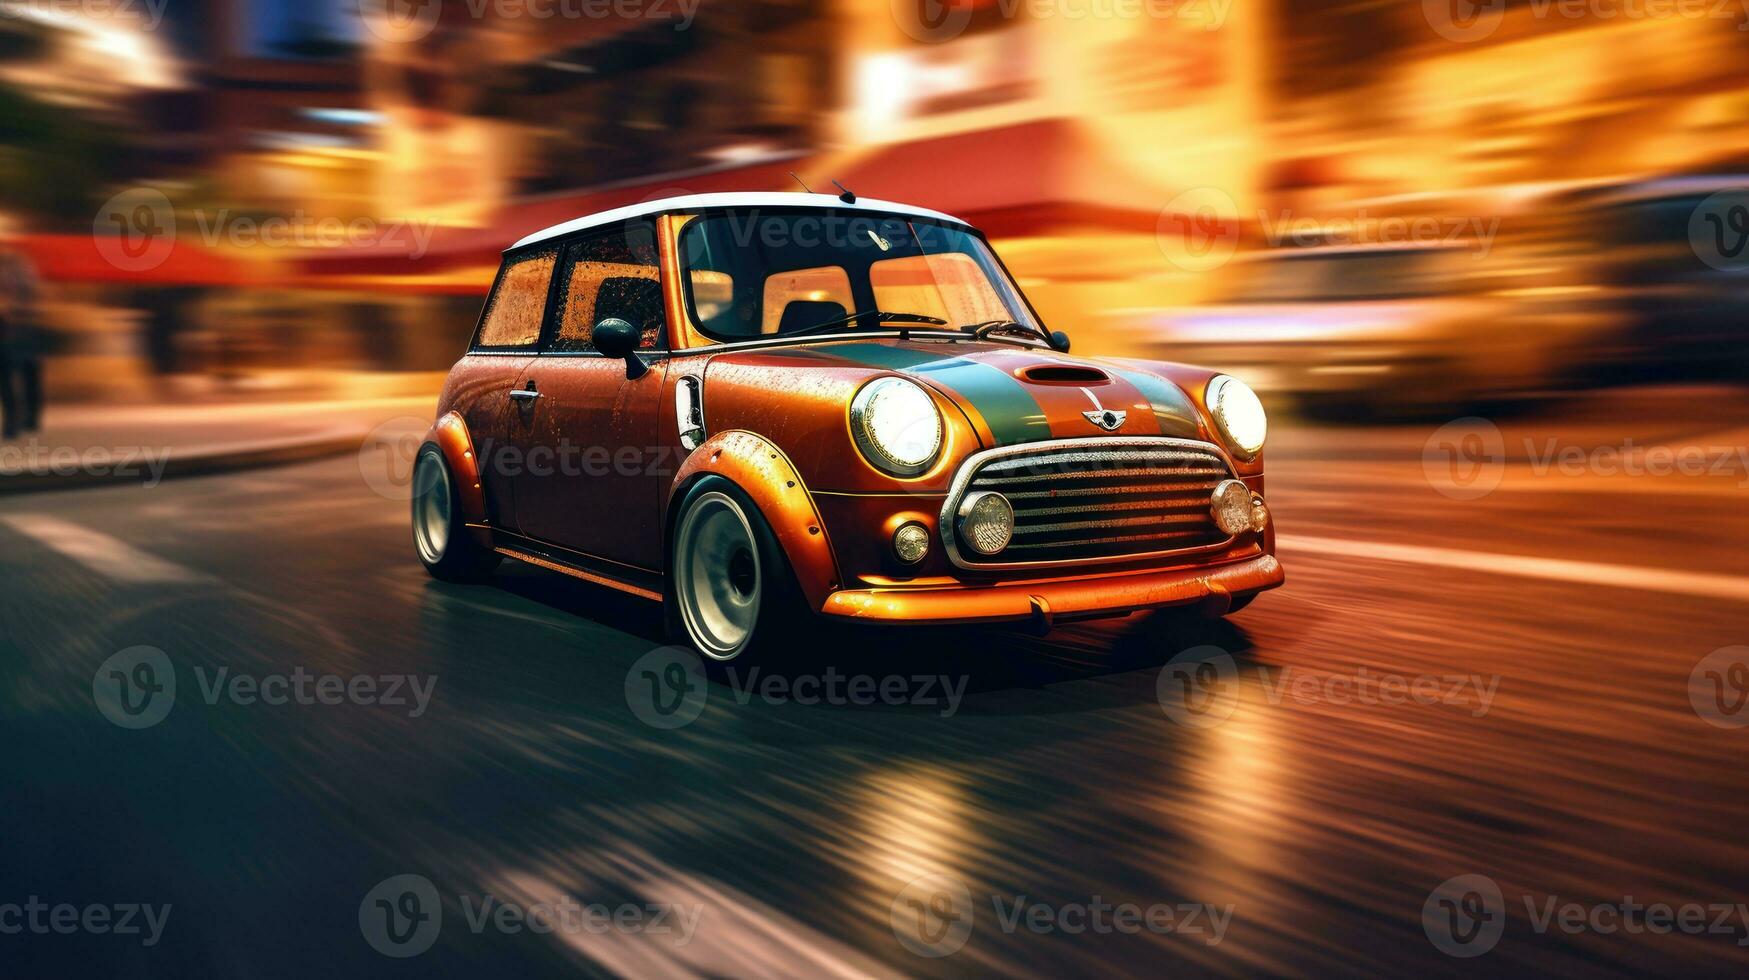 mini cooper john works drifting car professional photo dynamic in motion track tuning photography